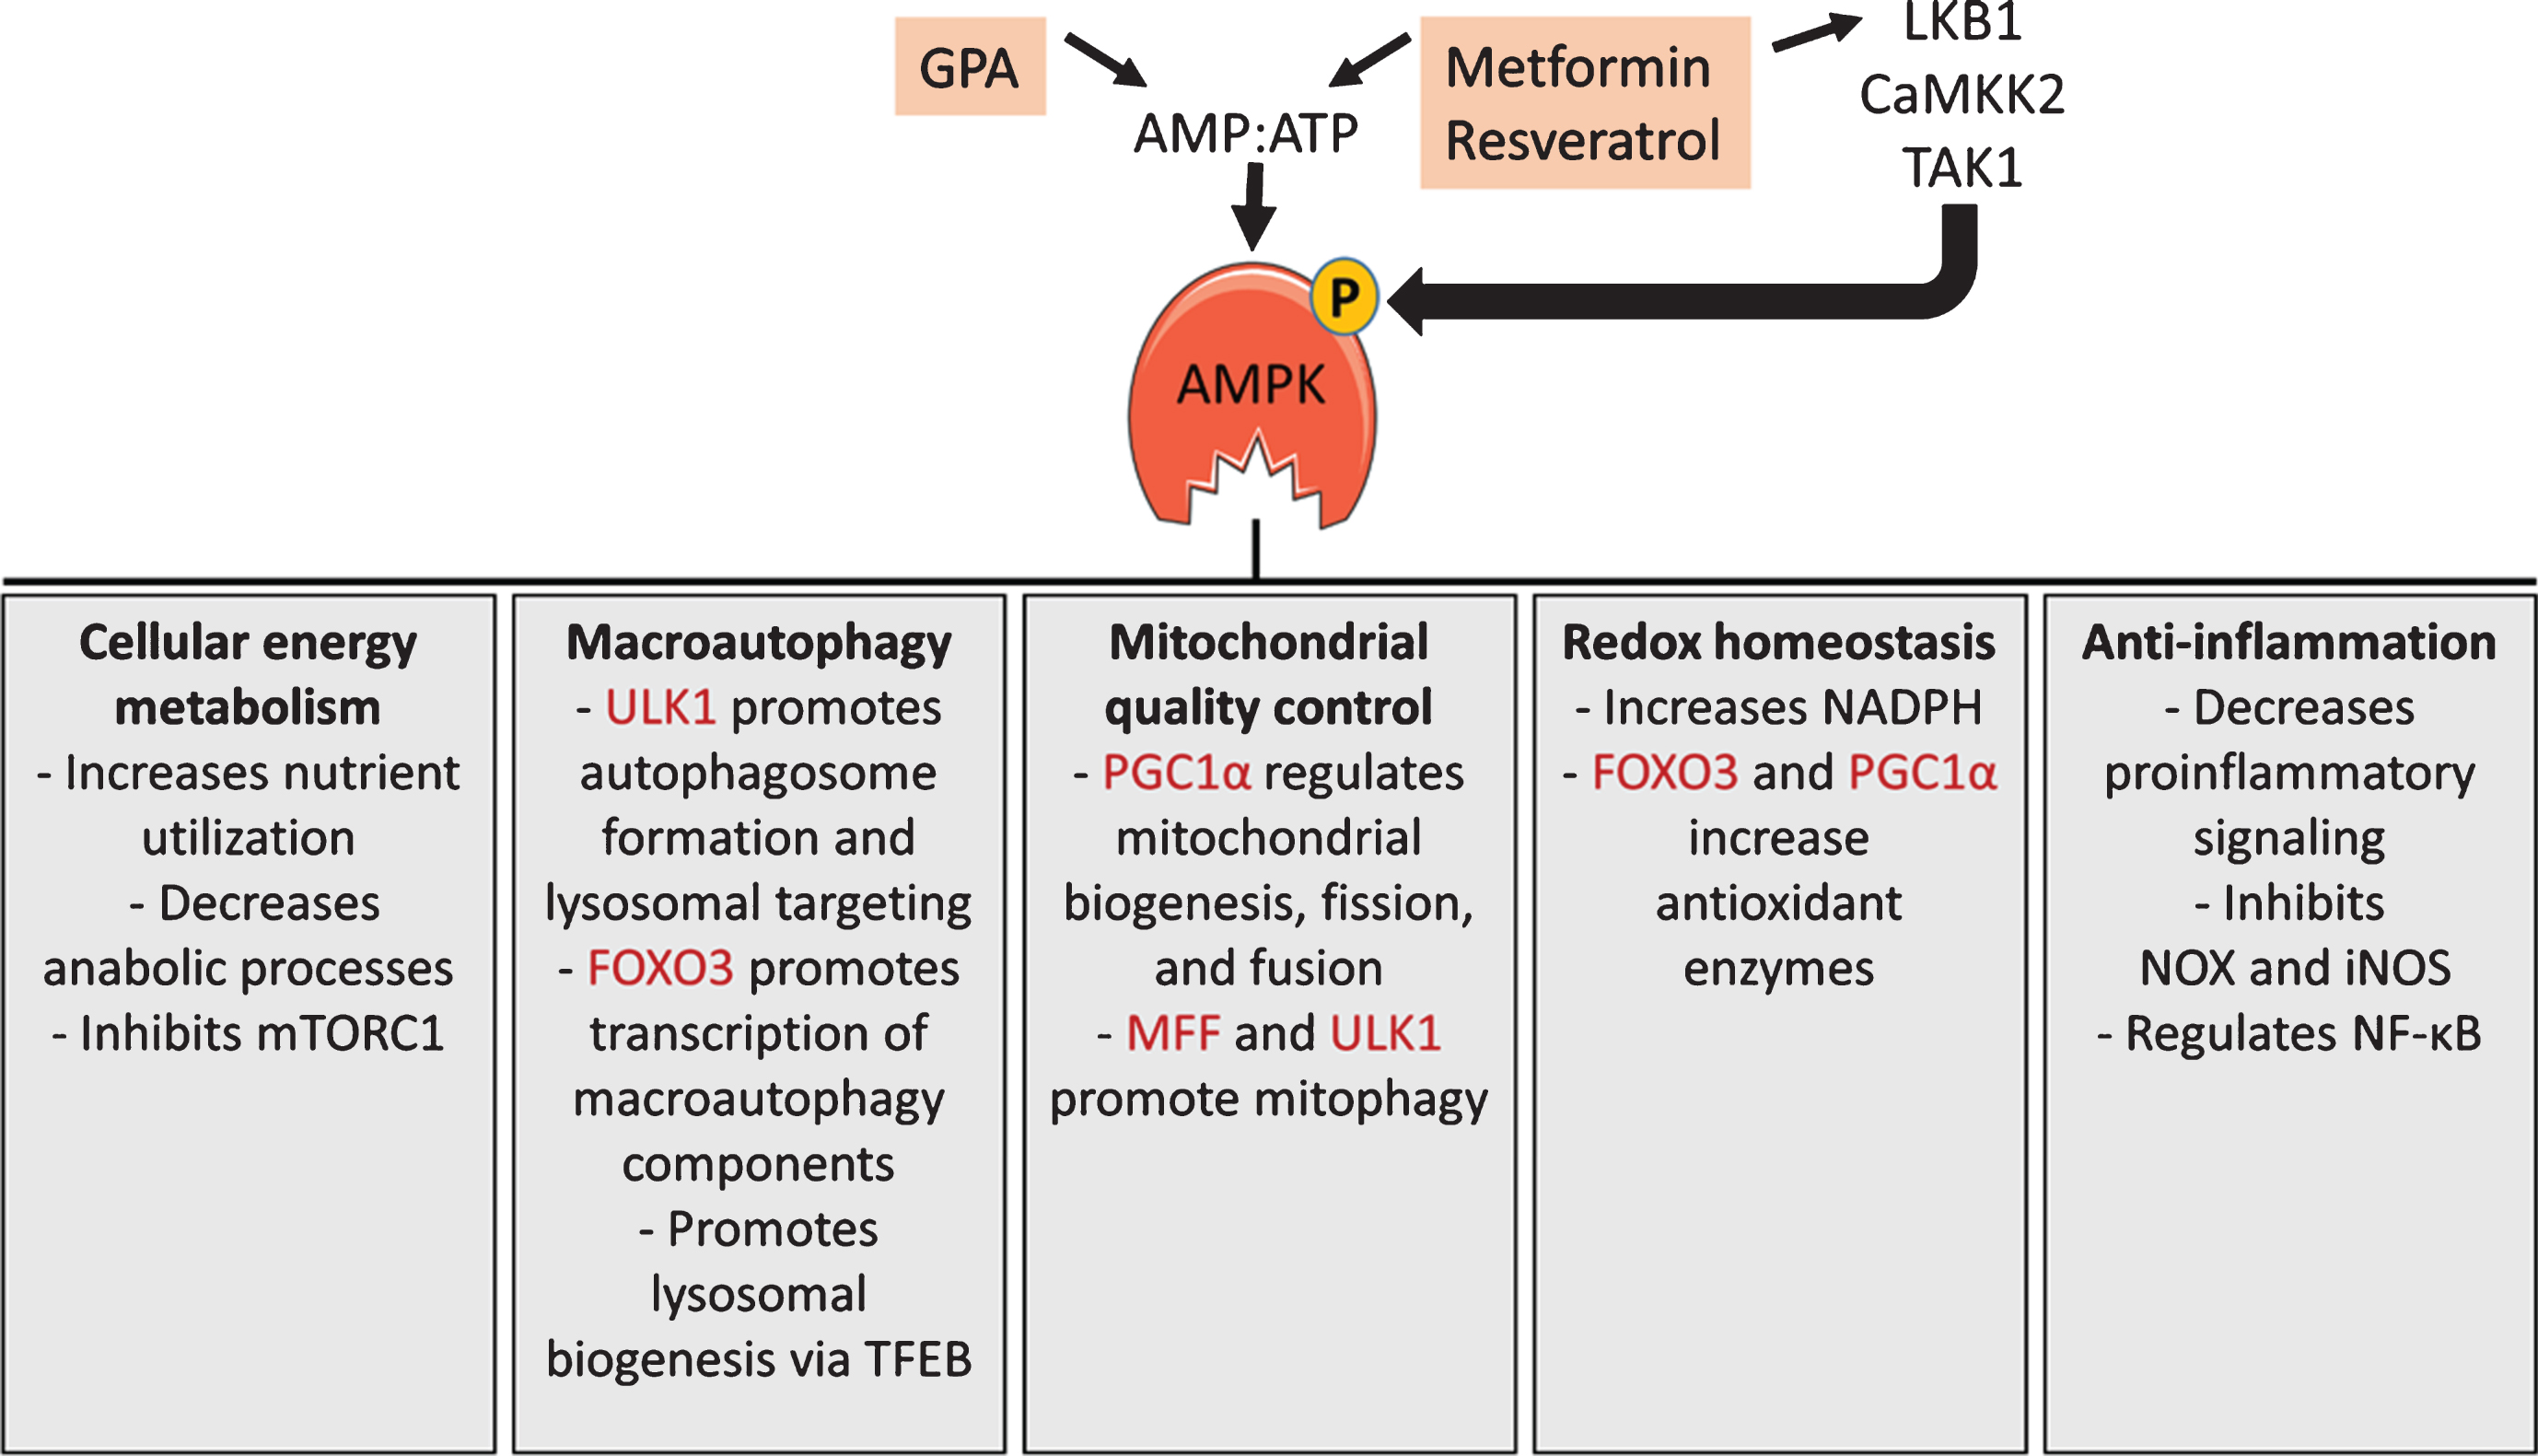 AMPK signaling. AMPK activity is regulated by the ratio of AMP to ATP and by at least 3 upstream kinases. Metformin, β-guanidinopropionic acid (GPA), and resveratrol activate AMPK by increasing the AMP:ATP ratio and/or by stimulating liver kinase B1 (LKB1) mediated phosphorylation of AMPK. AMPK has numerous functions, including changes to cellular energy metabolism, increased macroautophagy, enhanced mitochondrial quality control, redox homeostasis, and anti-inflammatory effects. A few specific functions within each area are listed, with direct phosphorylation targets of AMPK shaded. These functions are explained in more detail in the text.